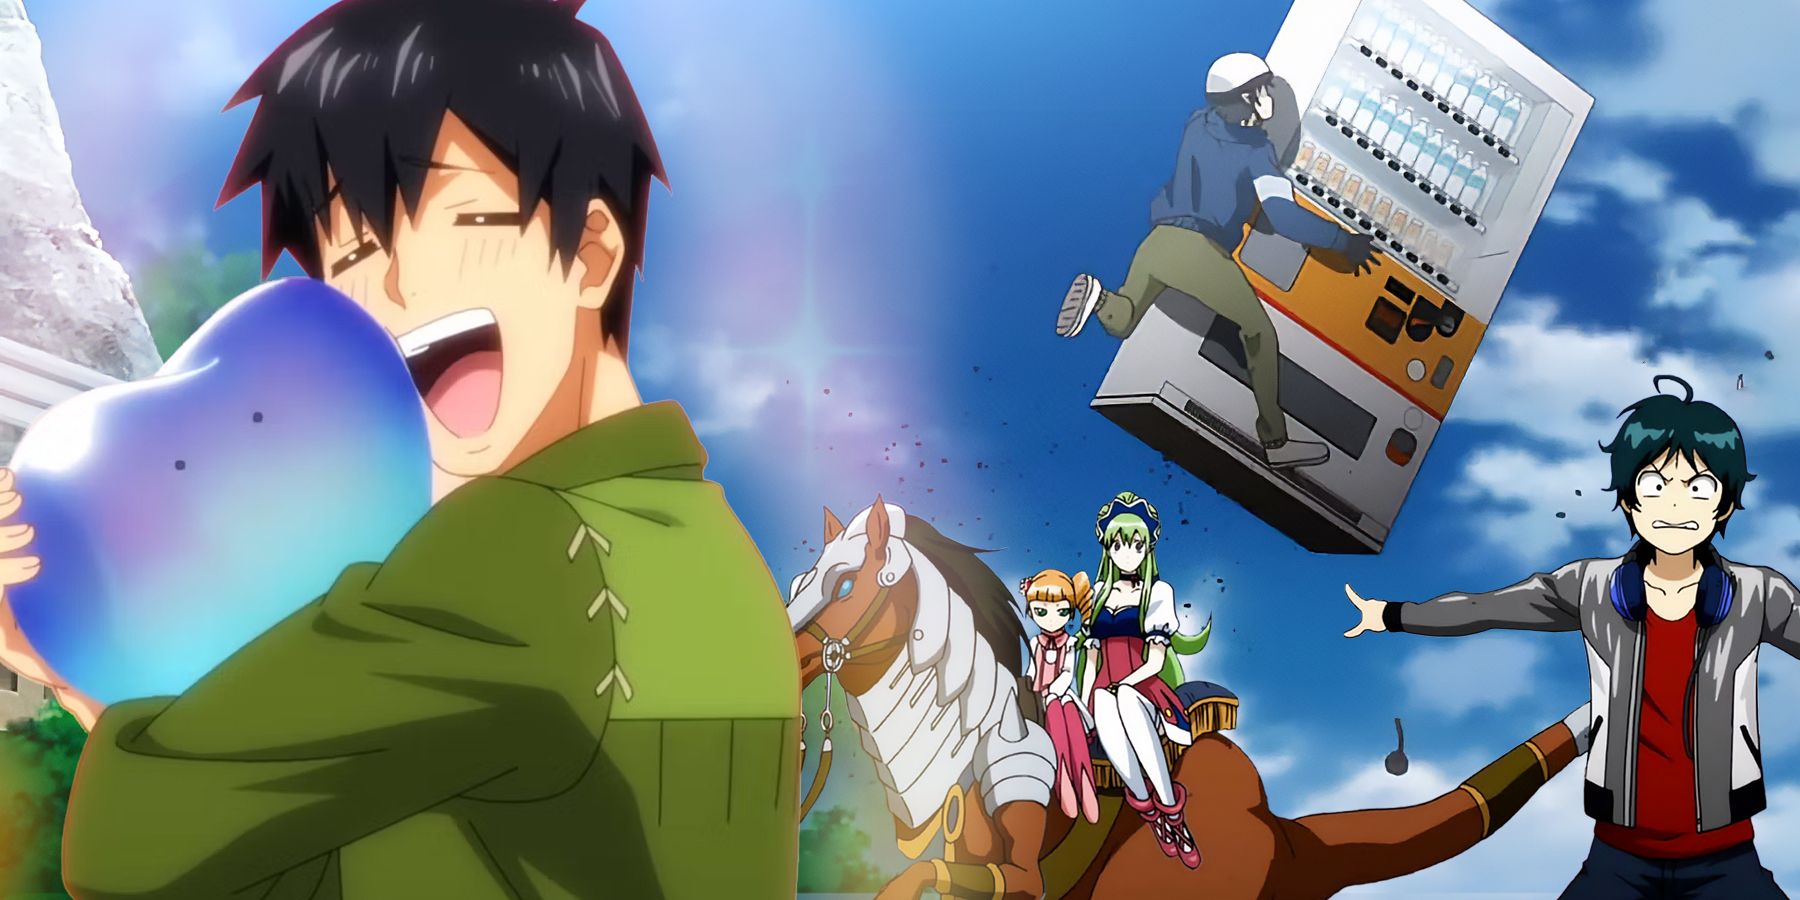 8 Recommendations for Funny and Entertaining Isekai Anime Comedies in 2023  - With a Light Storyline